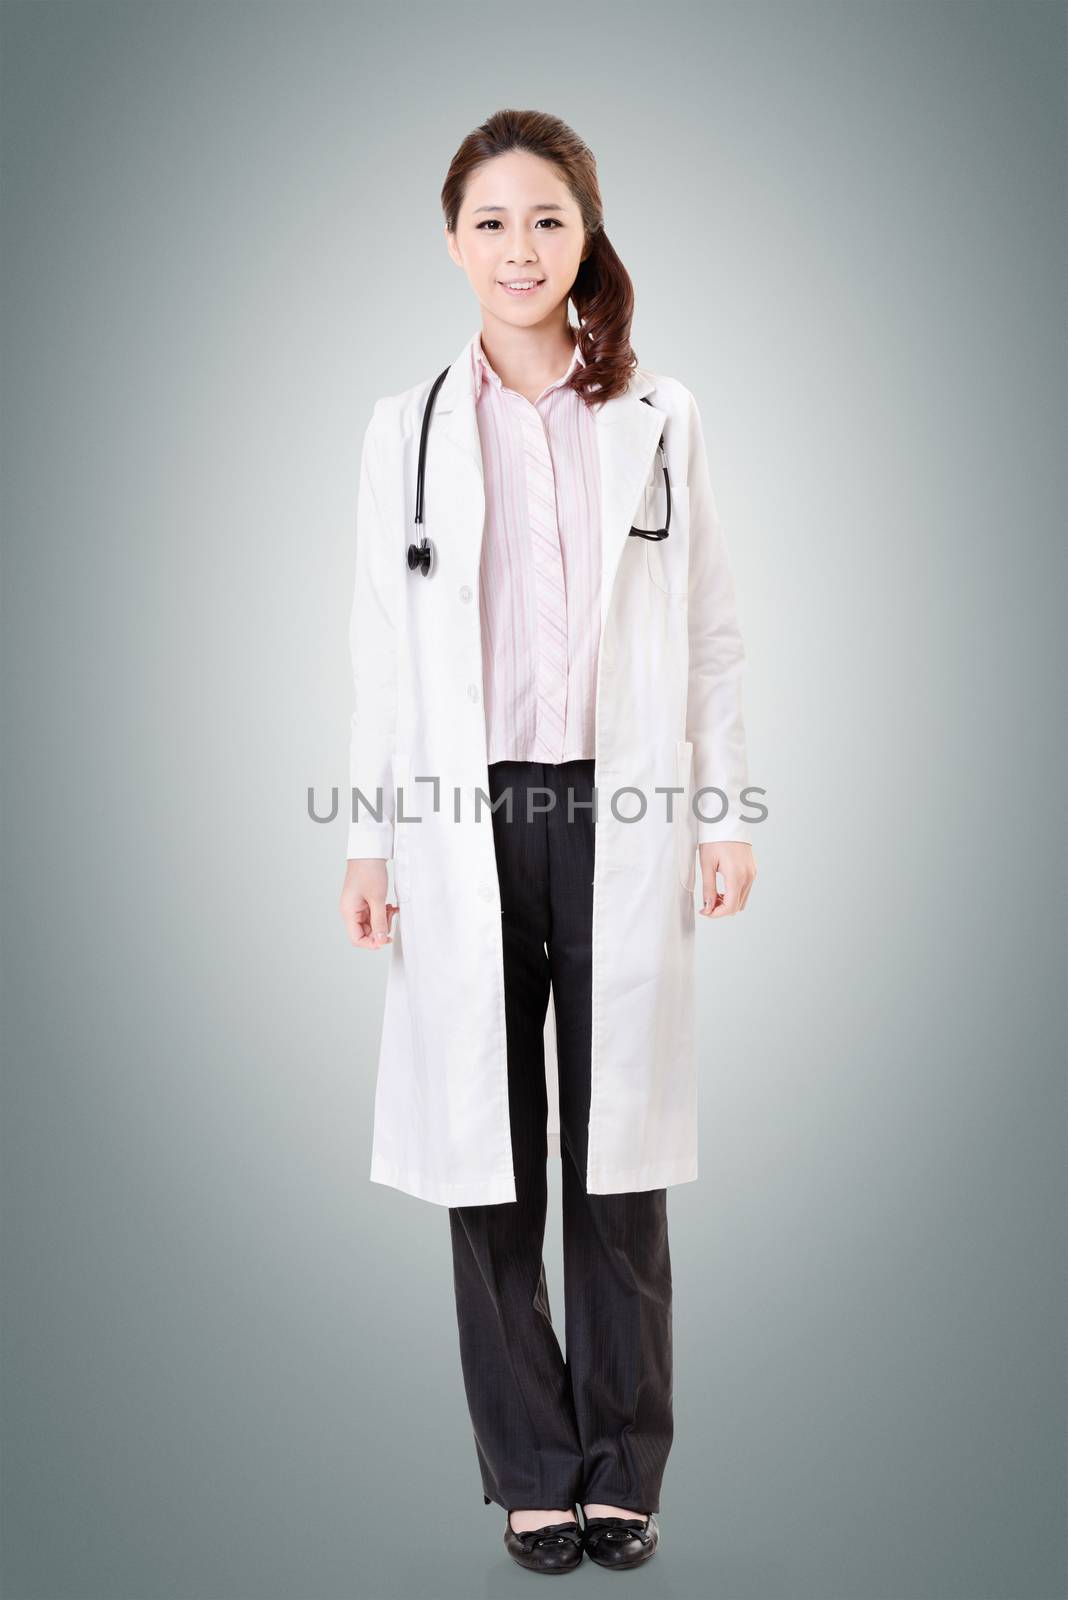 Friendly Asian doctor woman, full length portrait isolated on white background.